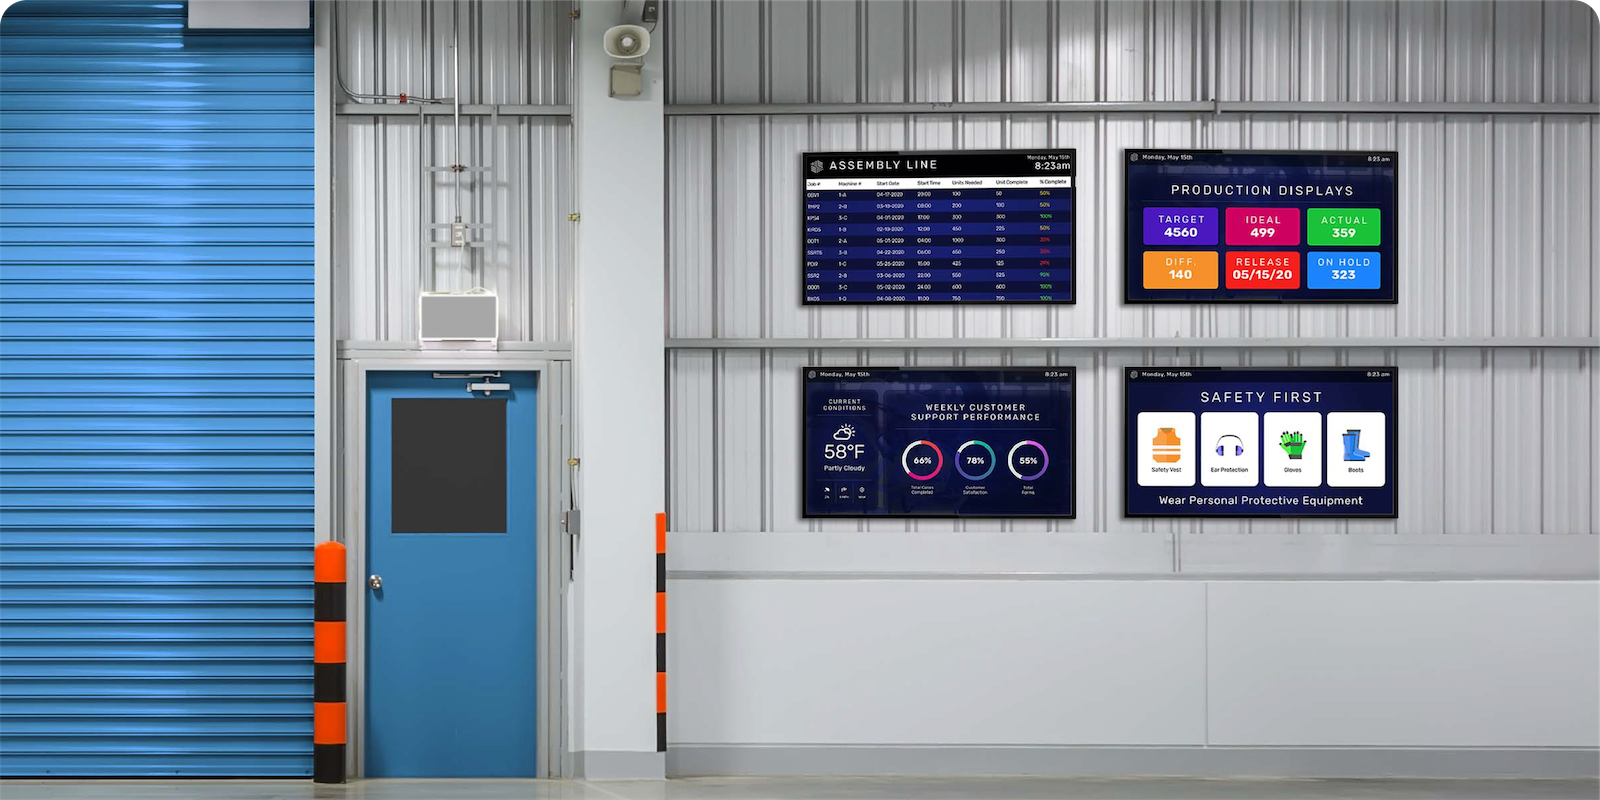 Skykit Beam Digital Signage Content Management Solution - manufacturing and warehouse example of data dashboards